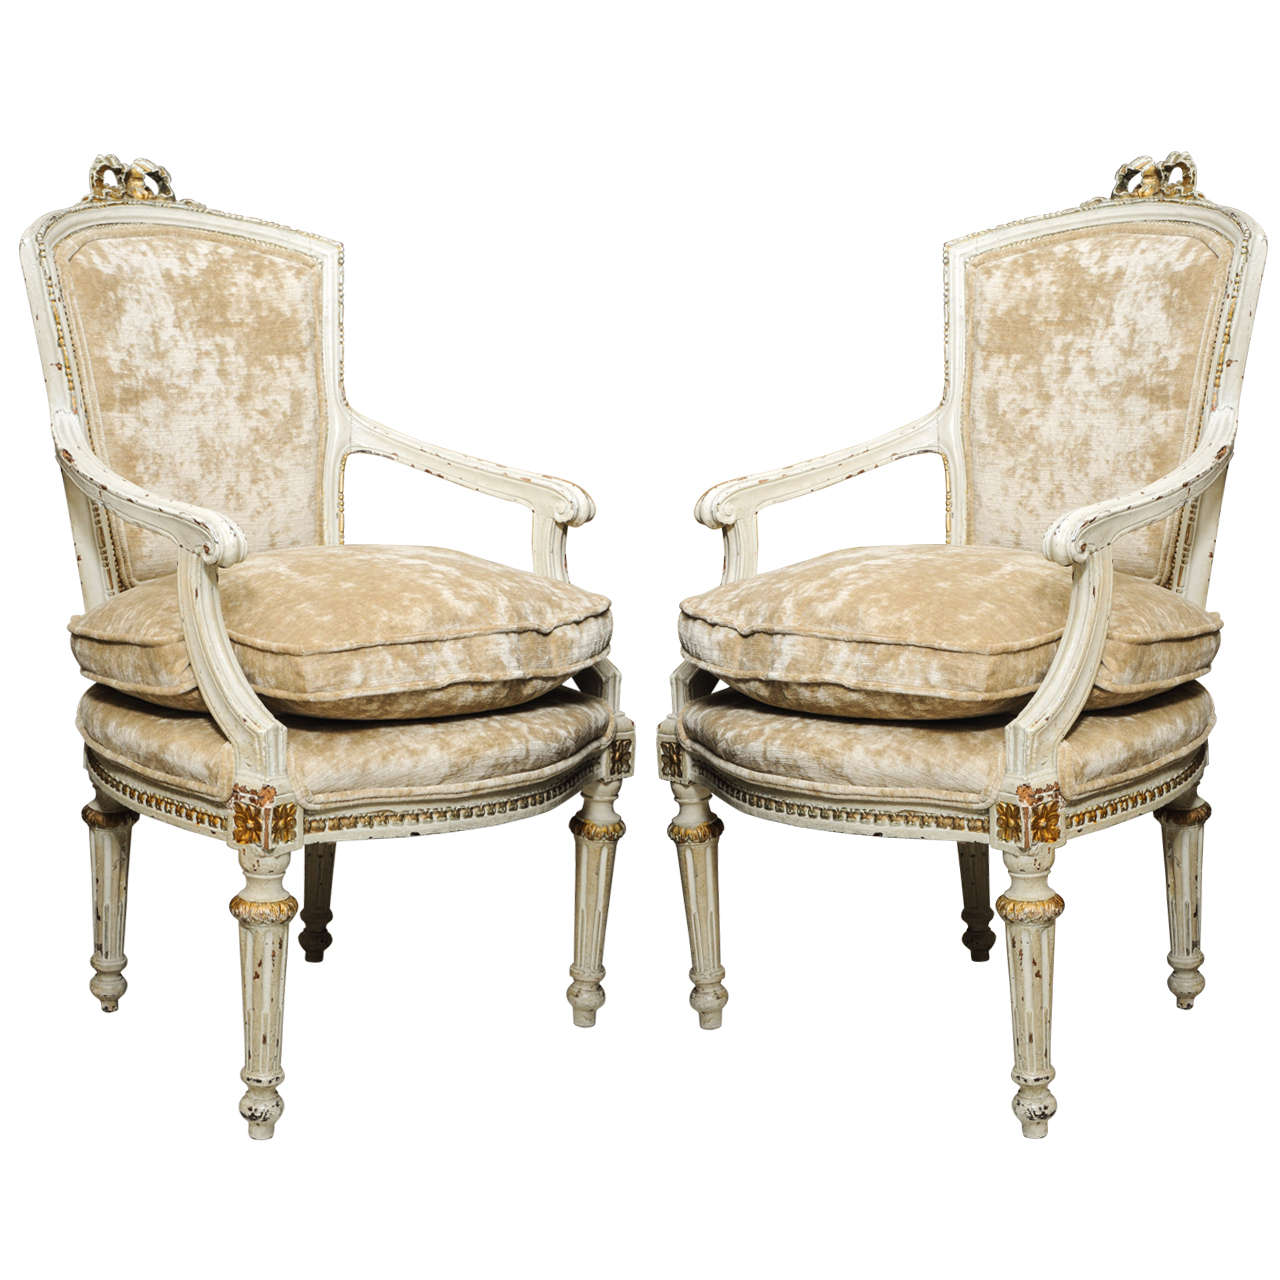 A Pair of Louis XVI 19th Century French Armchairs For Sale